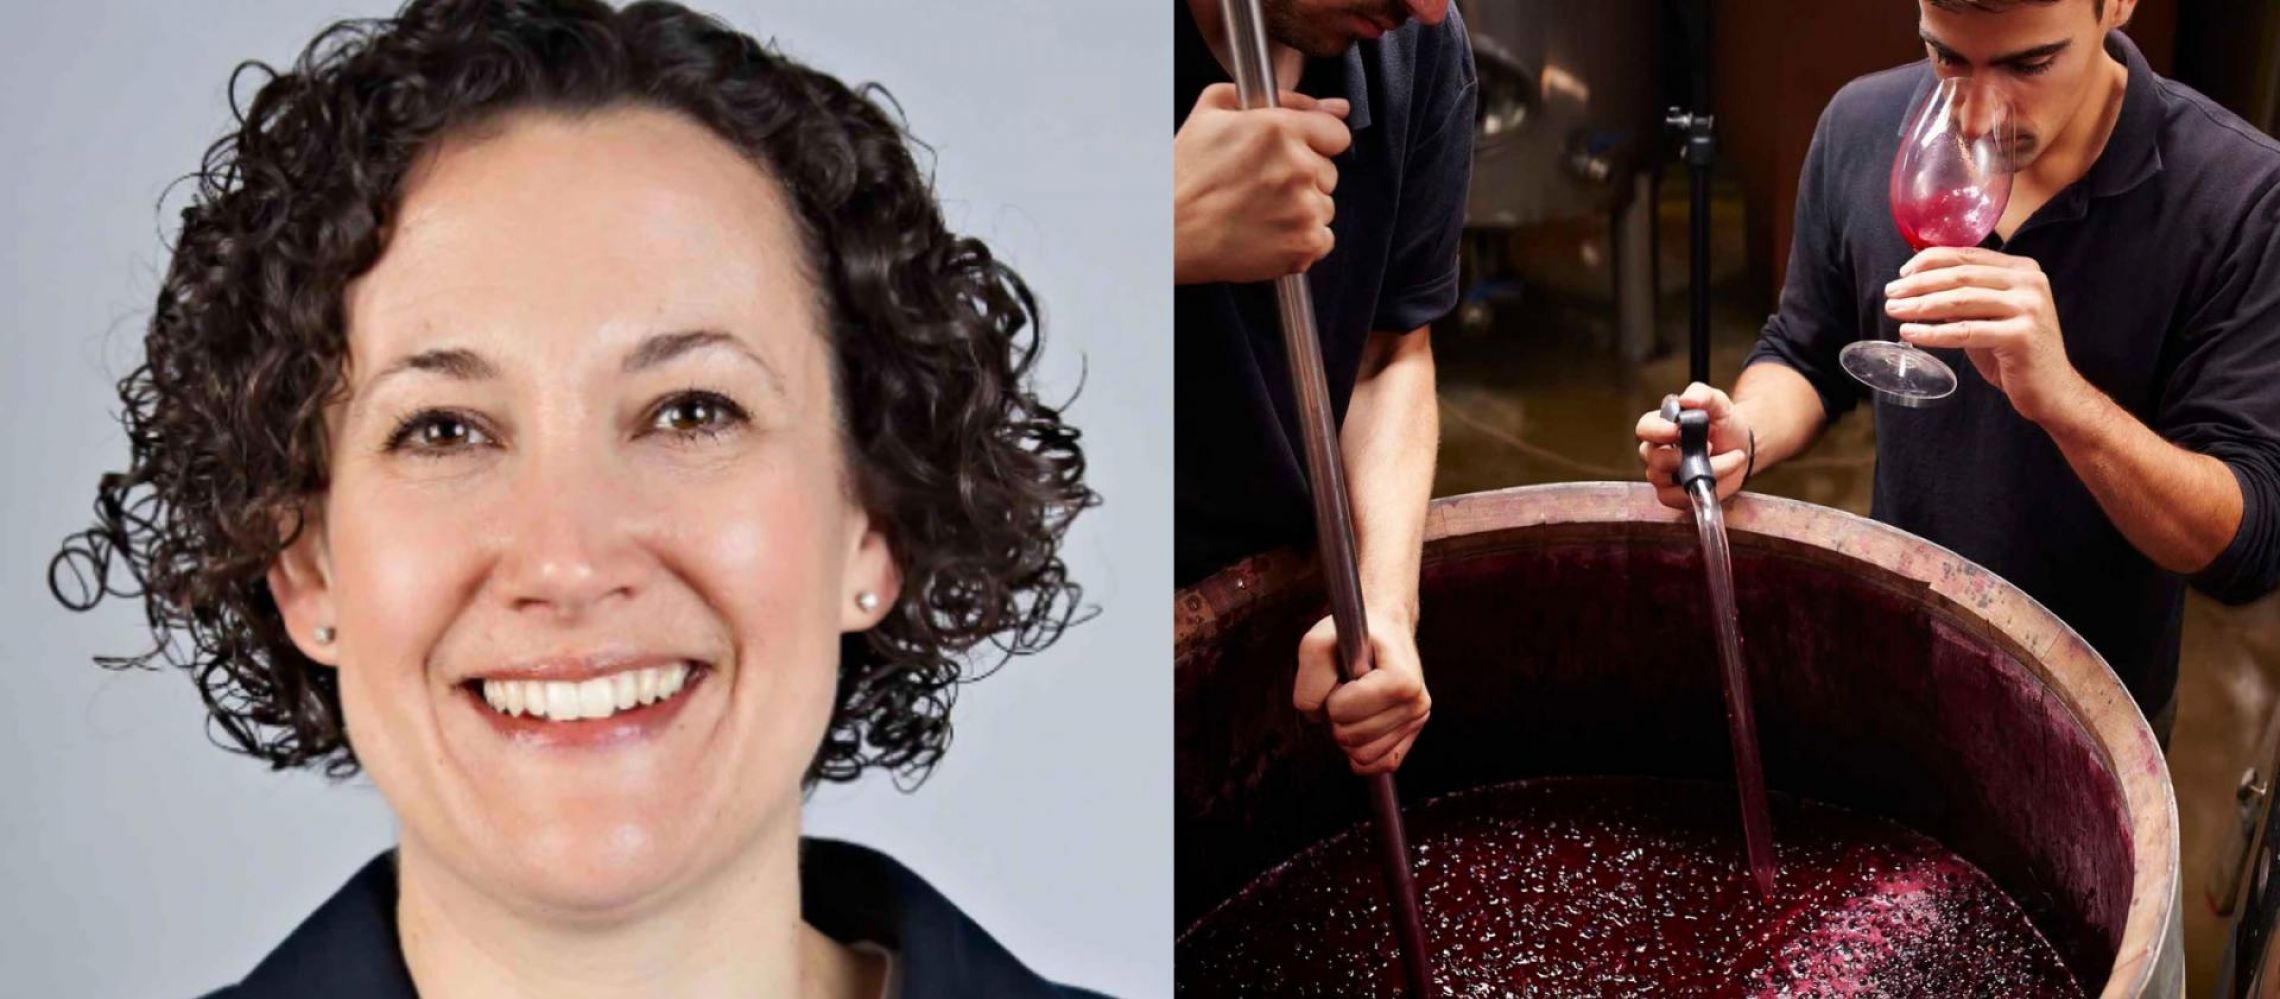 Photo for: Sara Muirhead MW Joins London Wine Competition Judging Panel